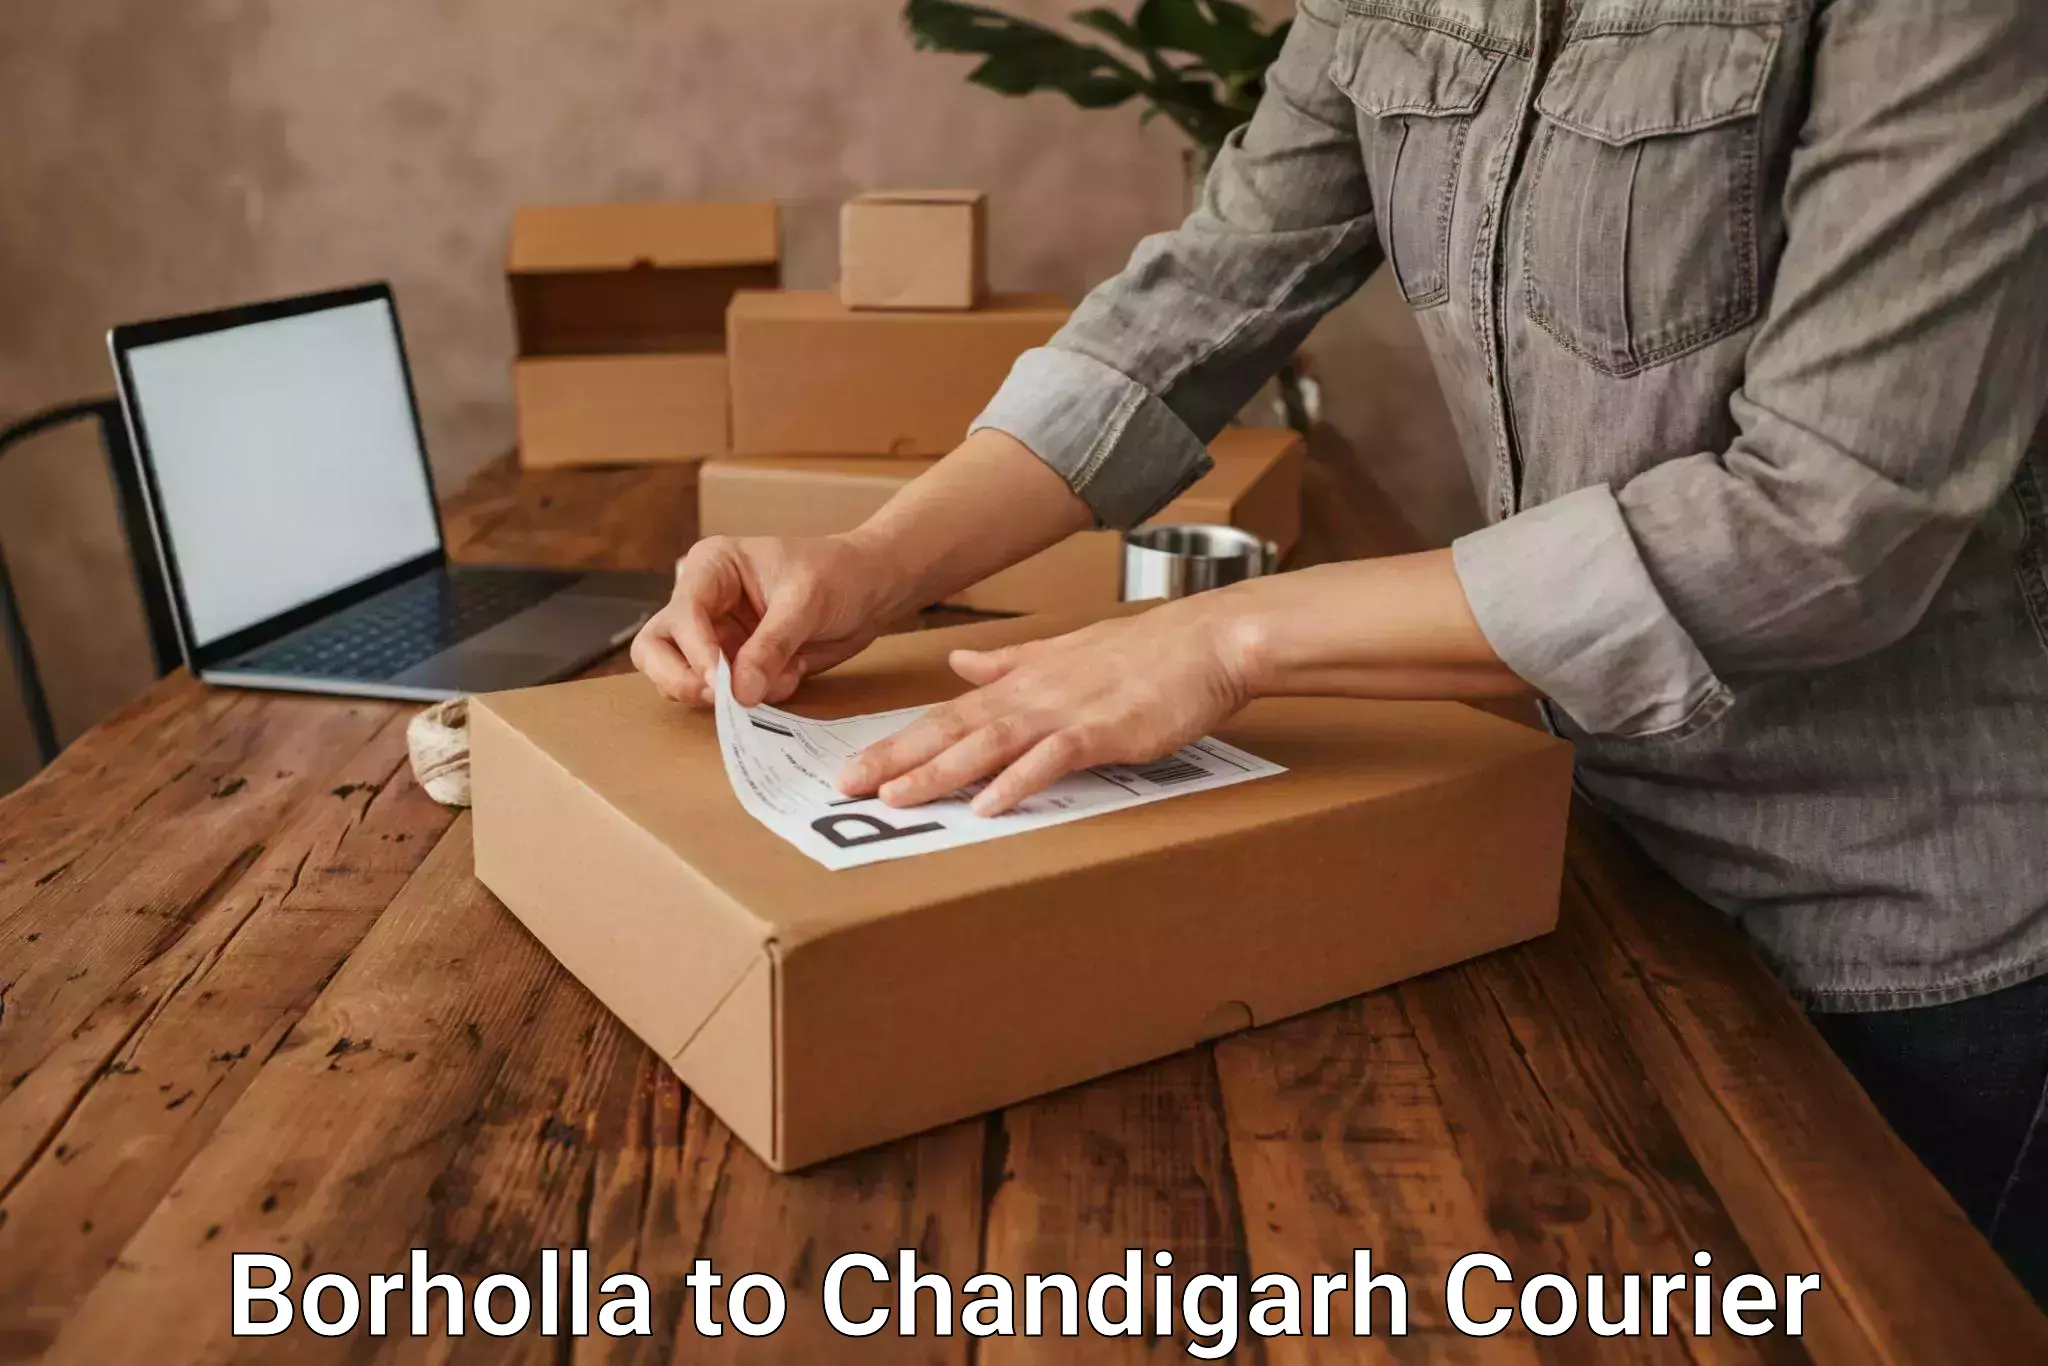 Custom courier packaging Borholla to Chandigarh